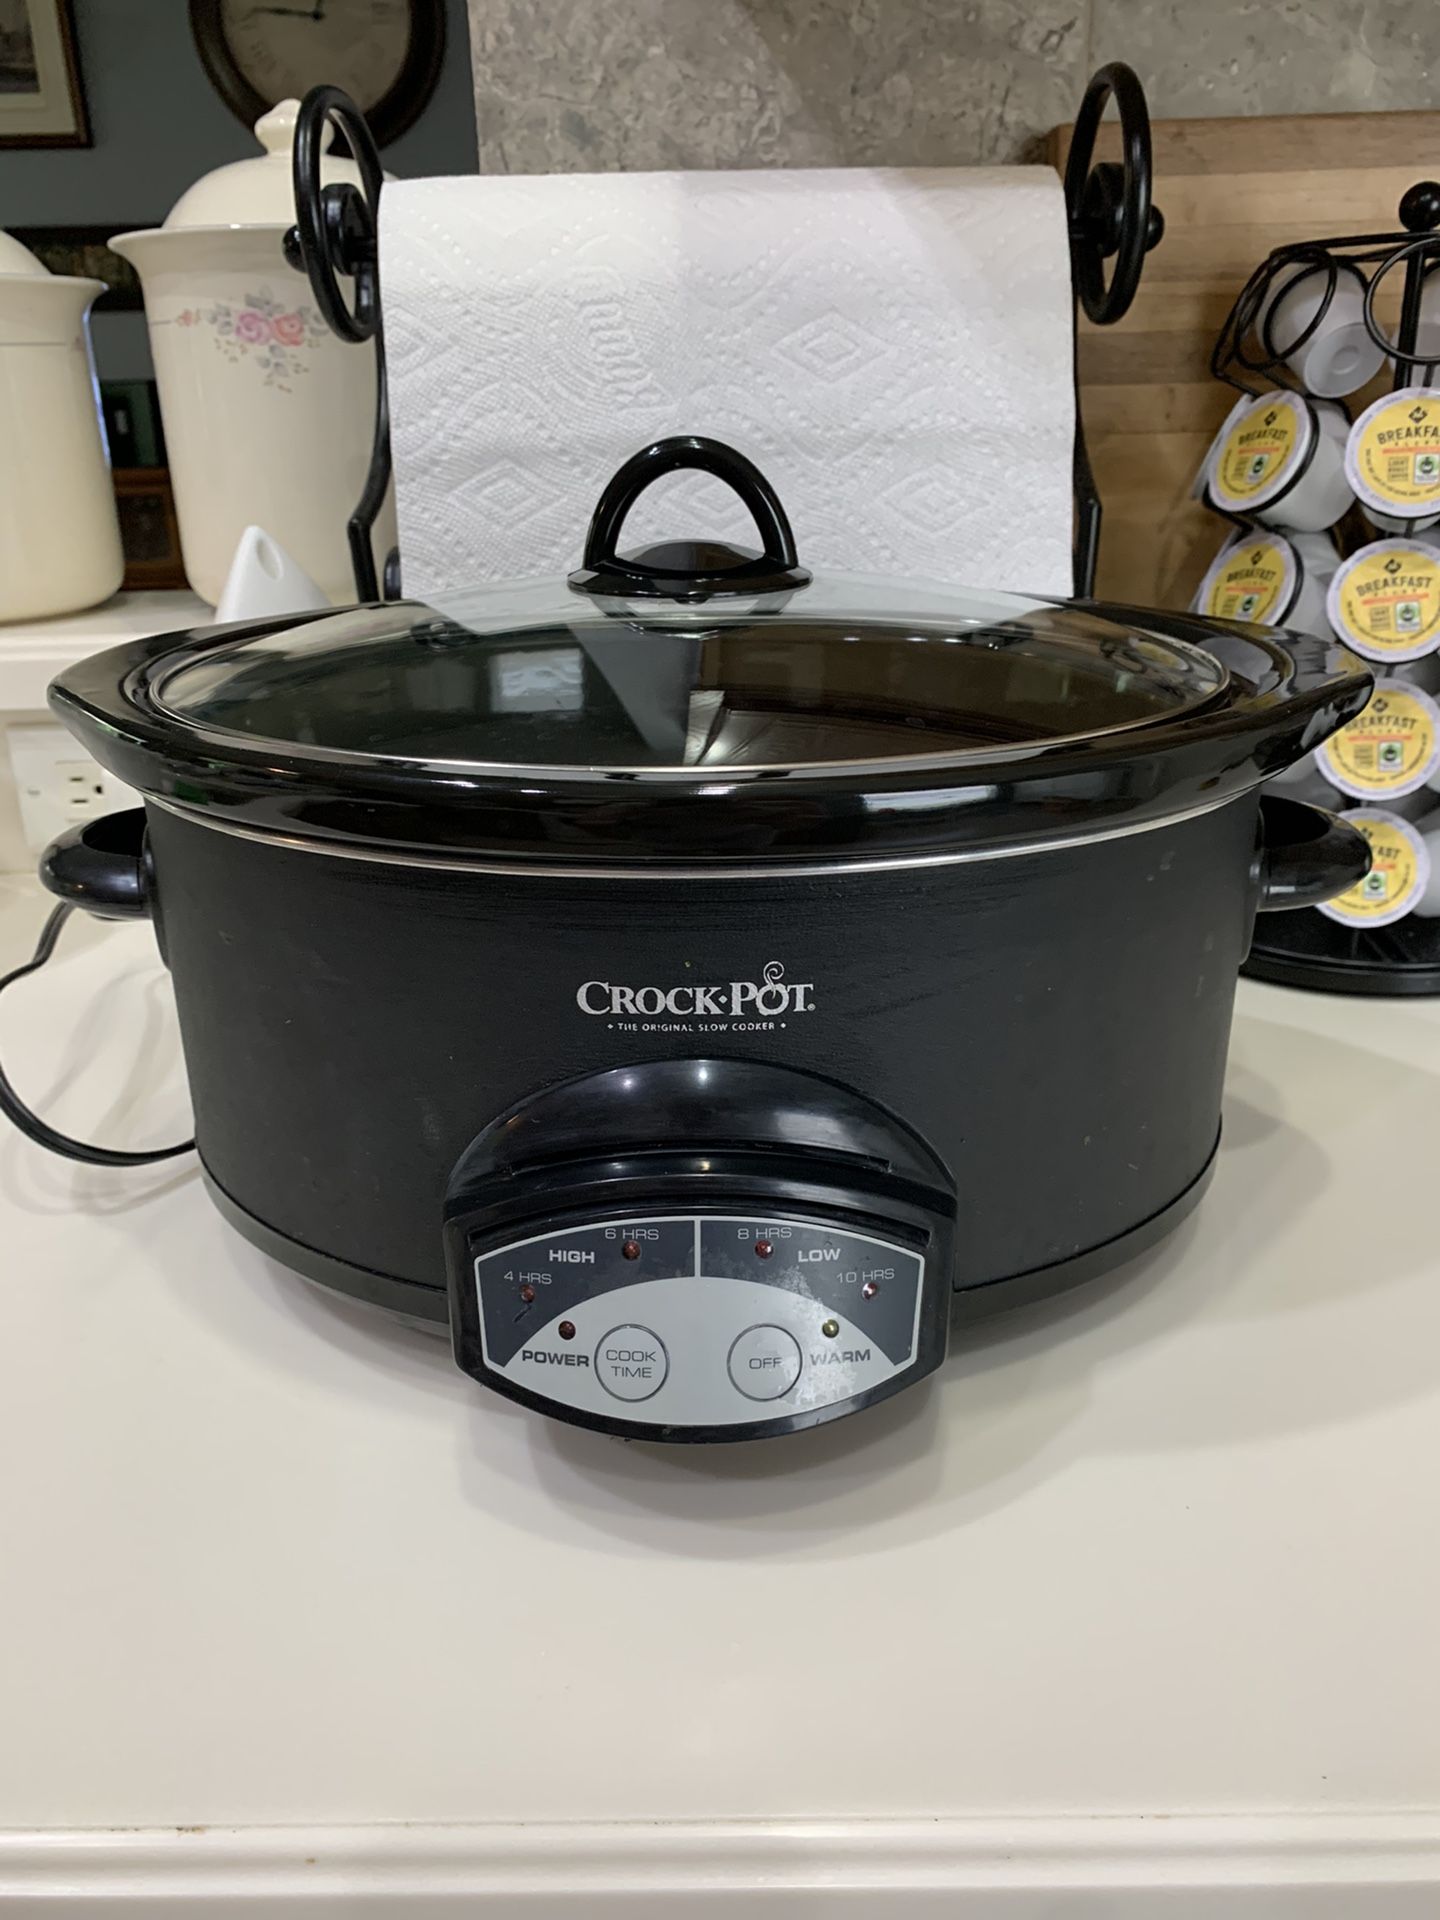 Nice Crock-pot in time for holidays!